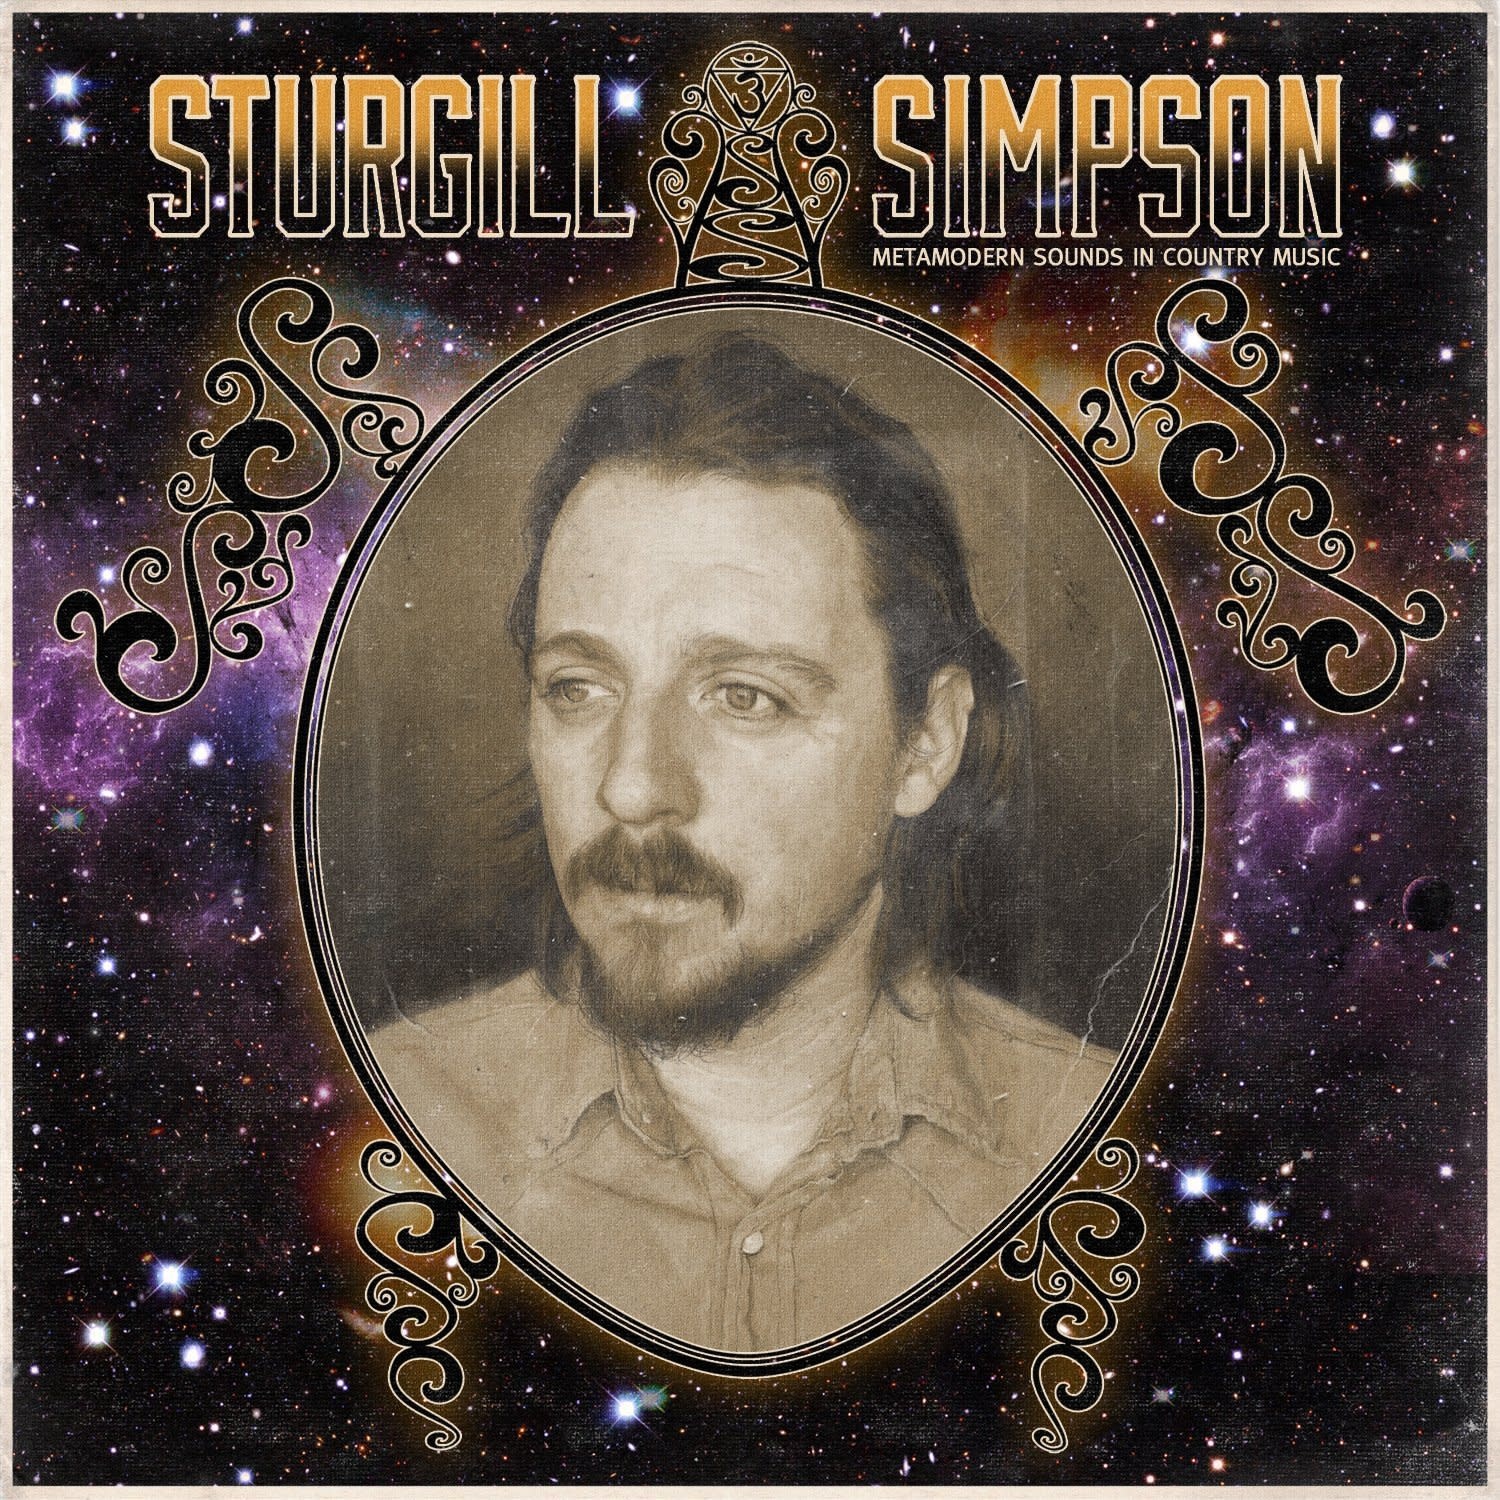 Loose Music Sturgill Simpson - Metamodern Sounds in Country Music